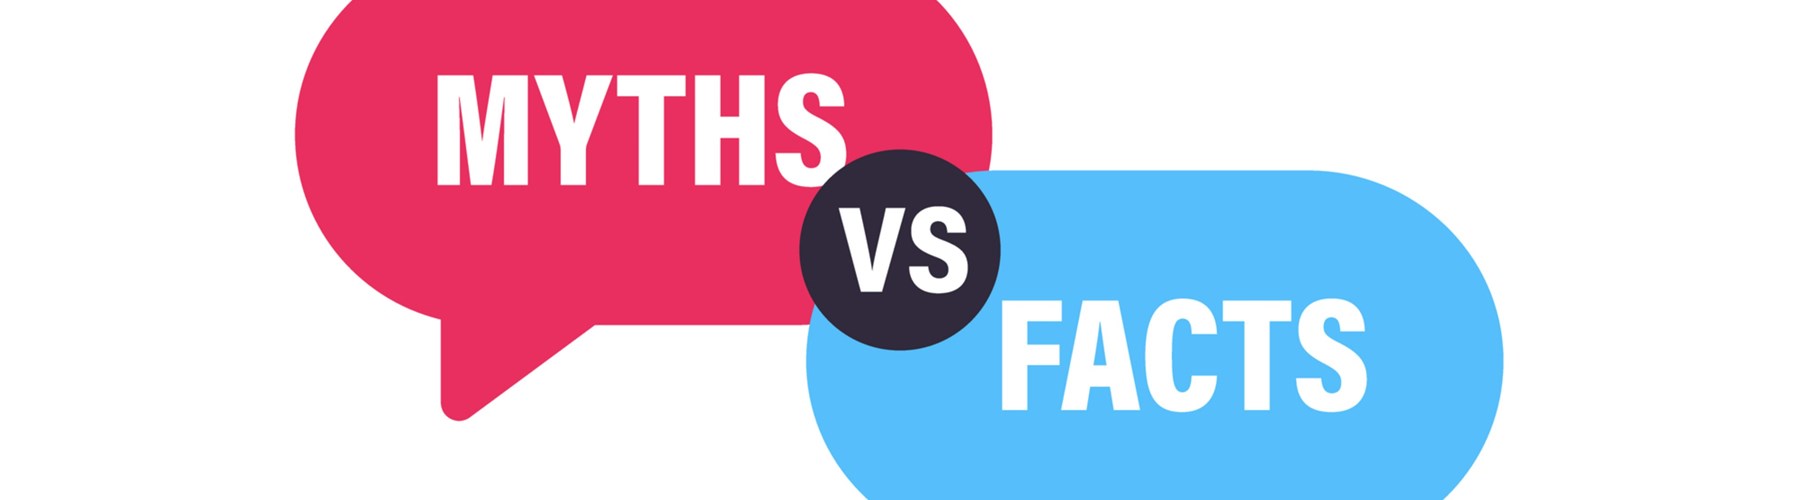 myths vs facts about car insurance